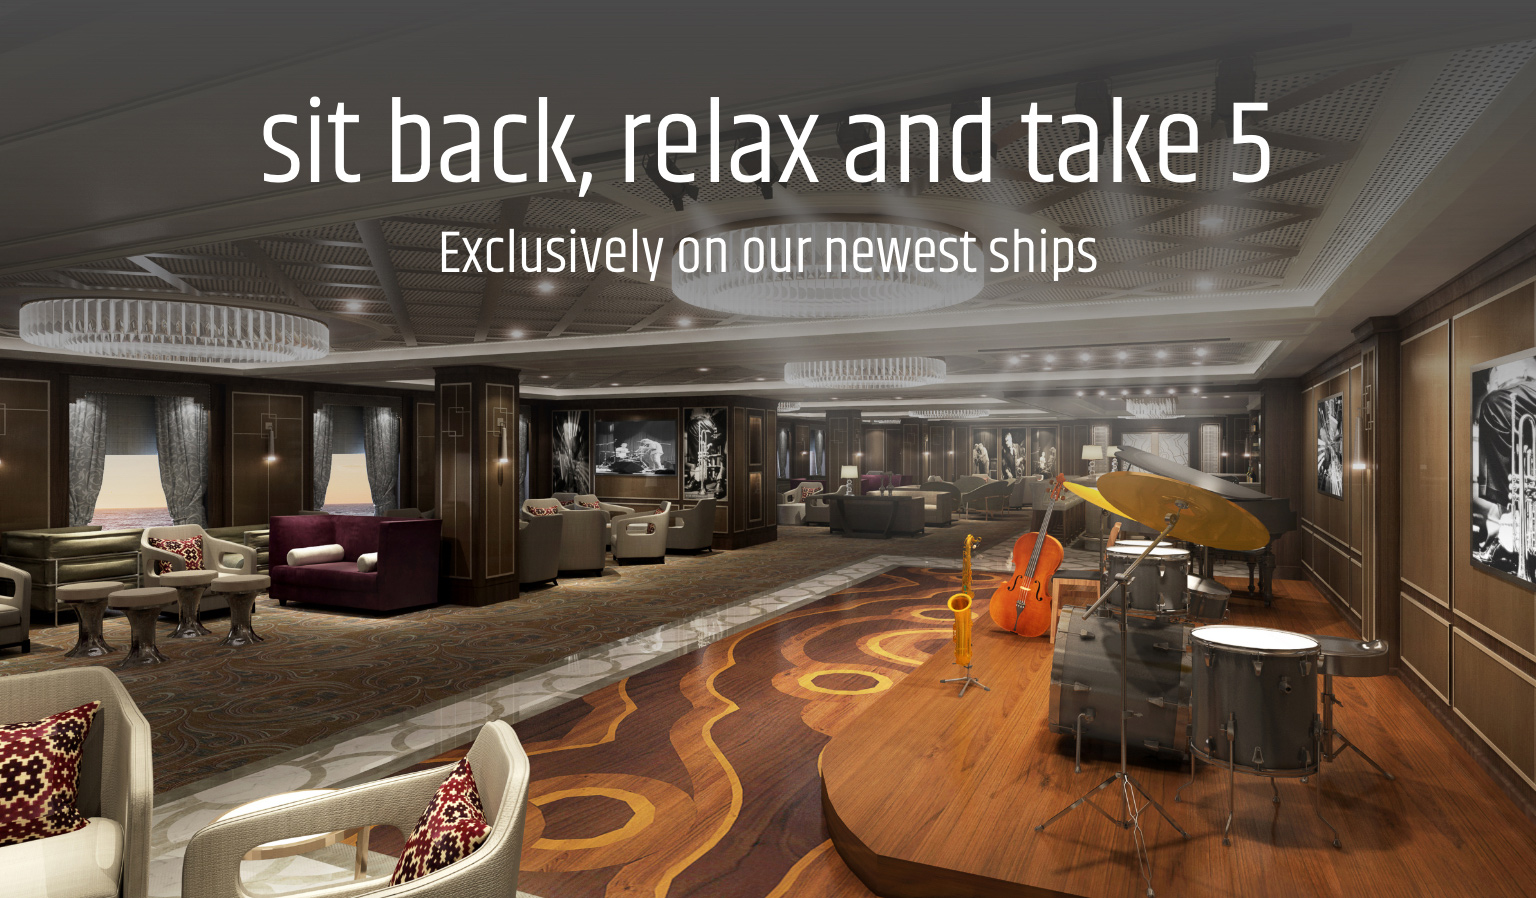 Sit back, Relax and Take 5 on Princess Cruises newest ships!